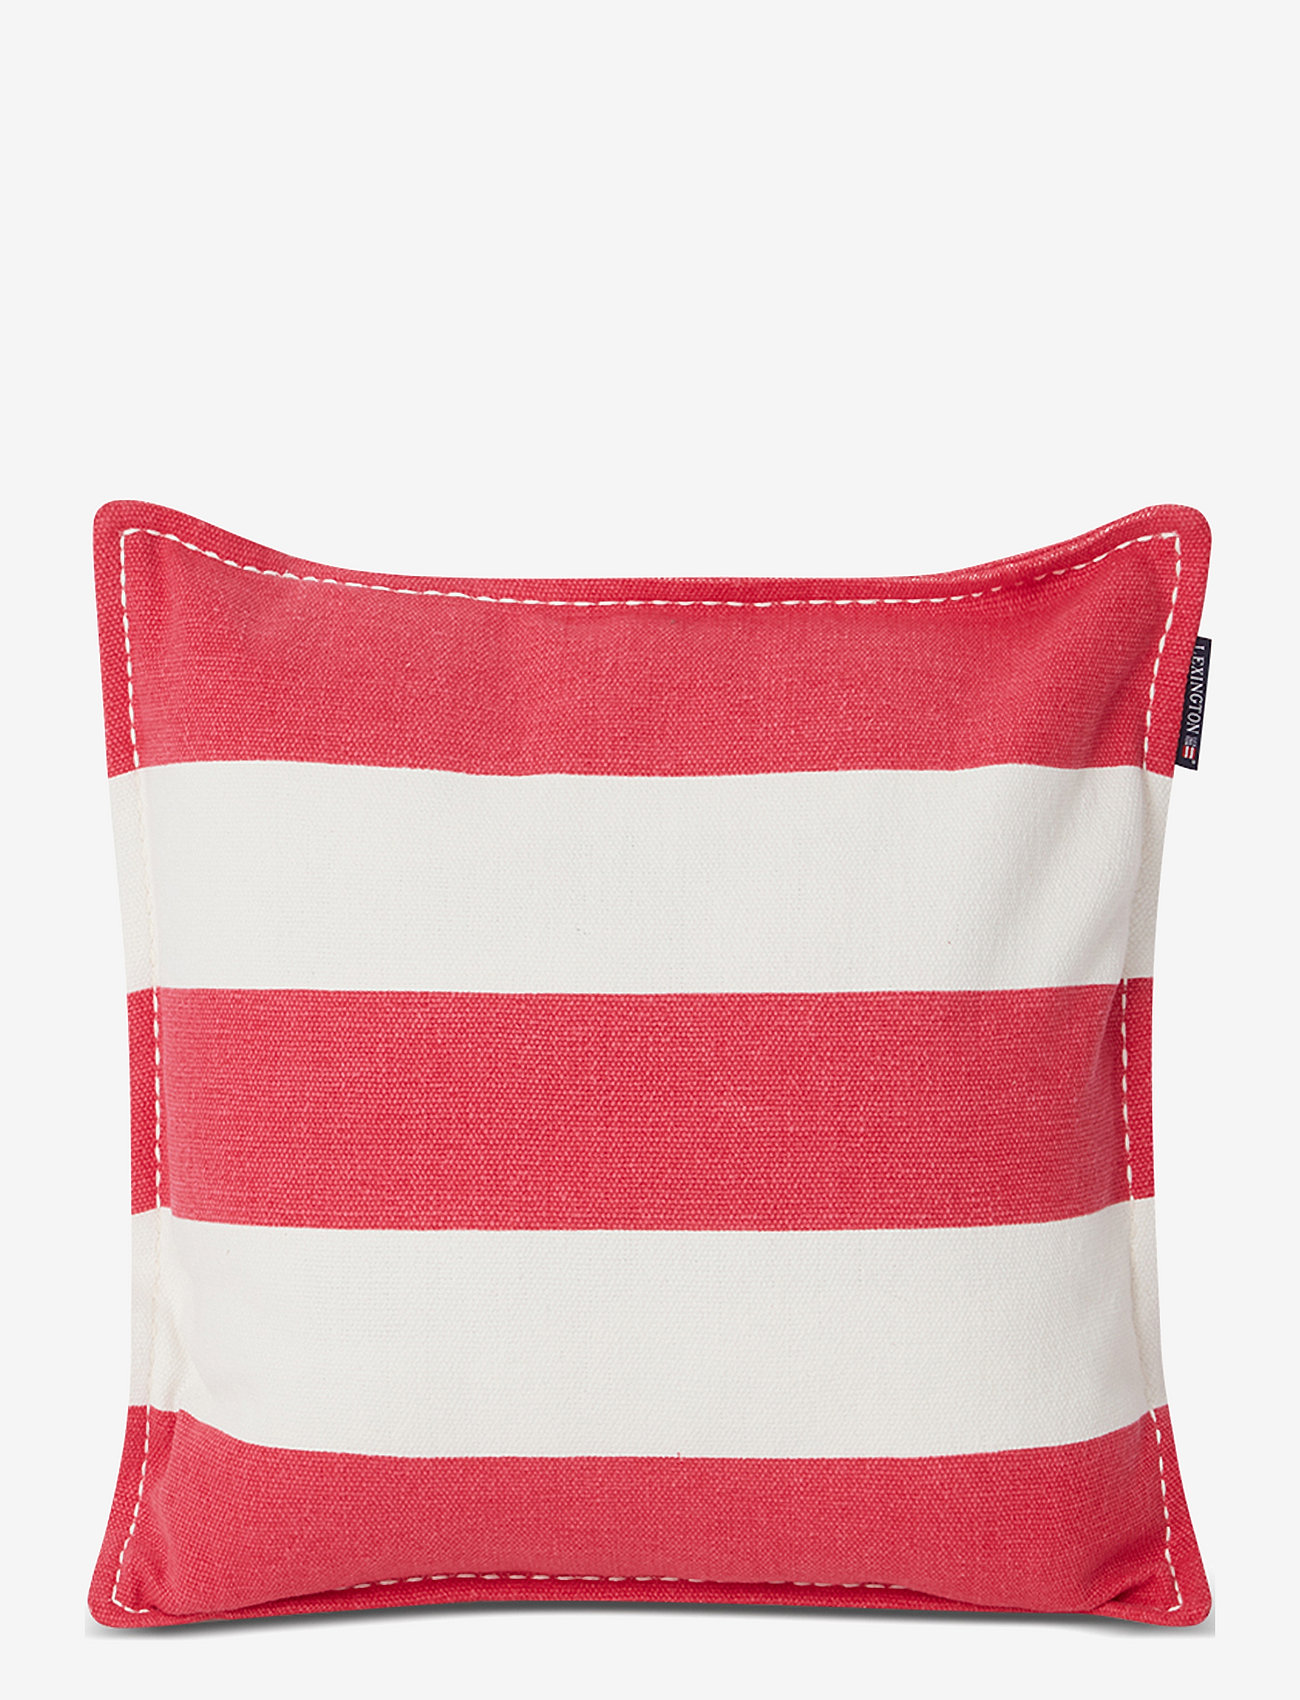 Lexington Home - Block Stripe Printed Recycled Cotton Pillow Cover - cushion covers - cerise/white - 0